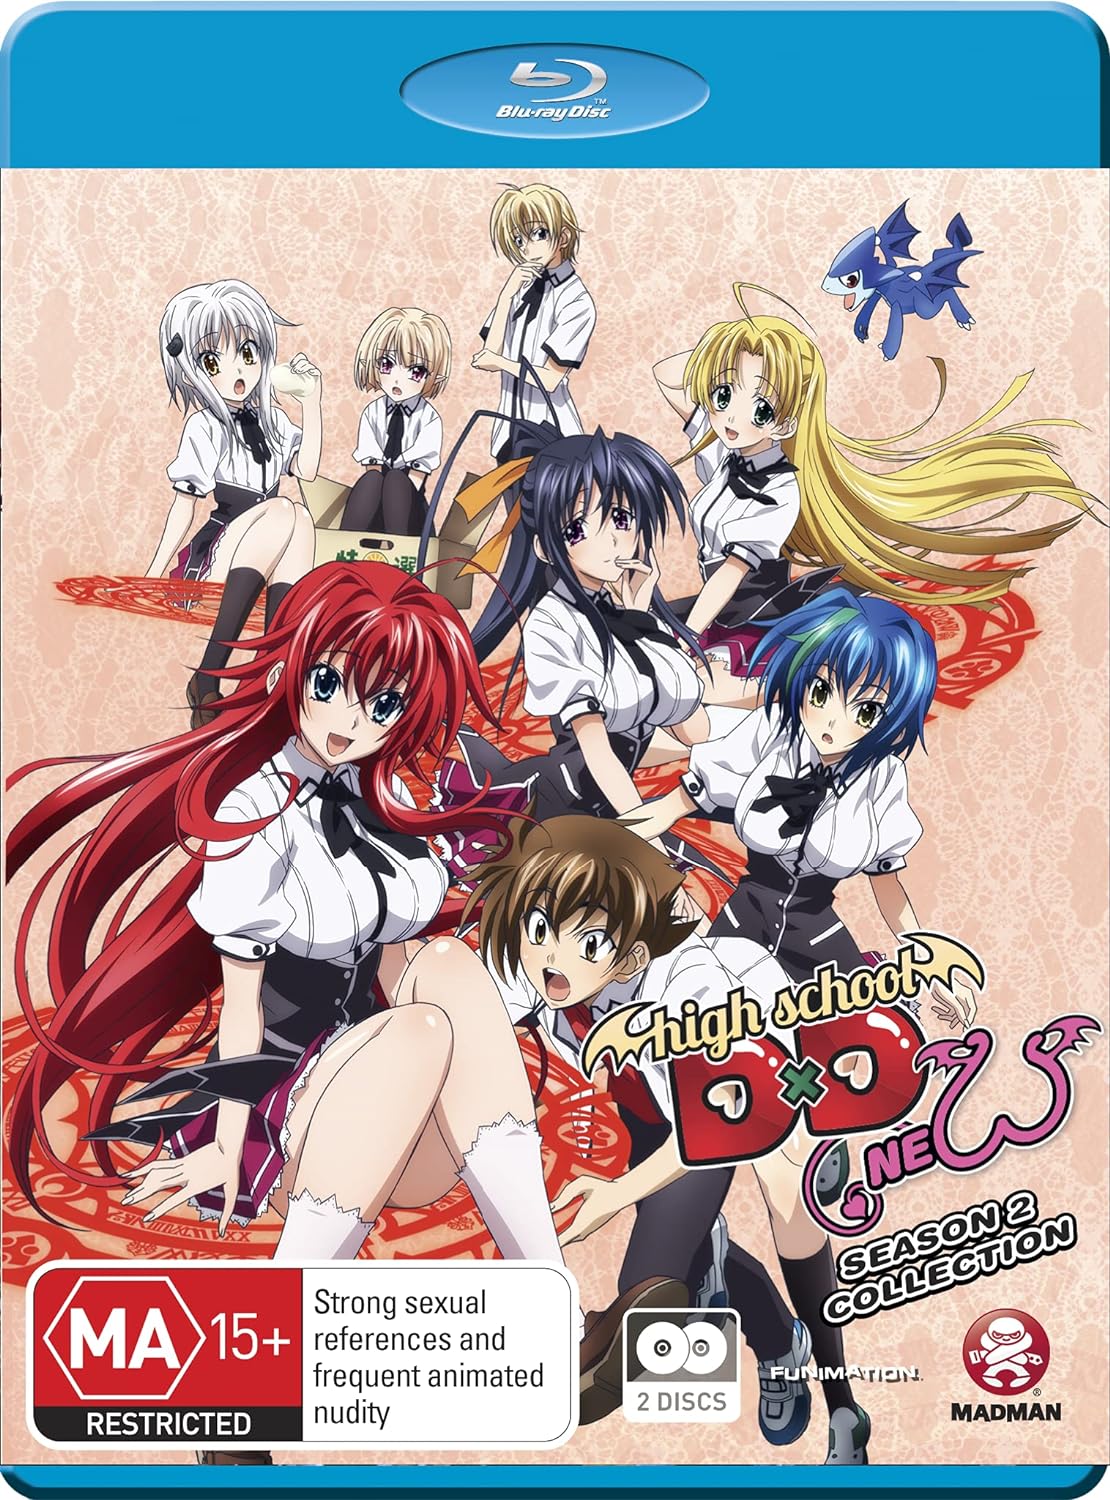 christy statham recommends highschool dxd season 2 pic